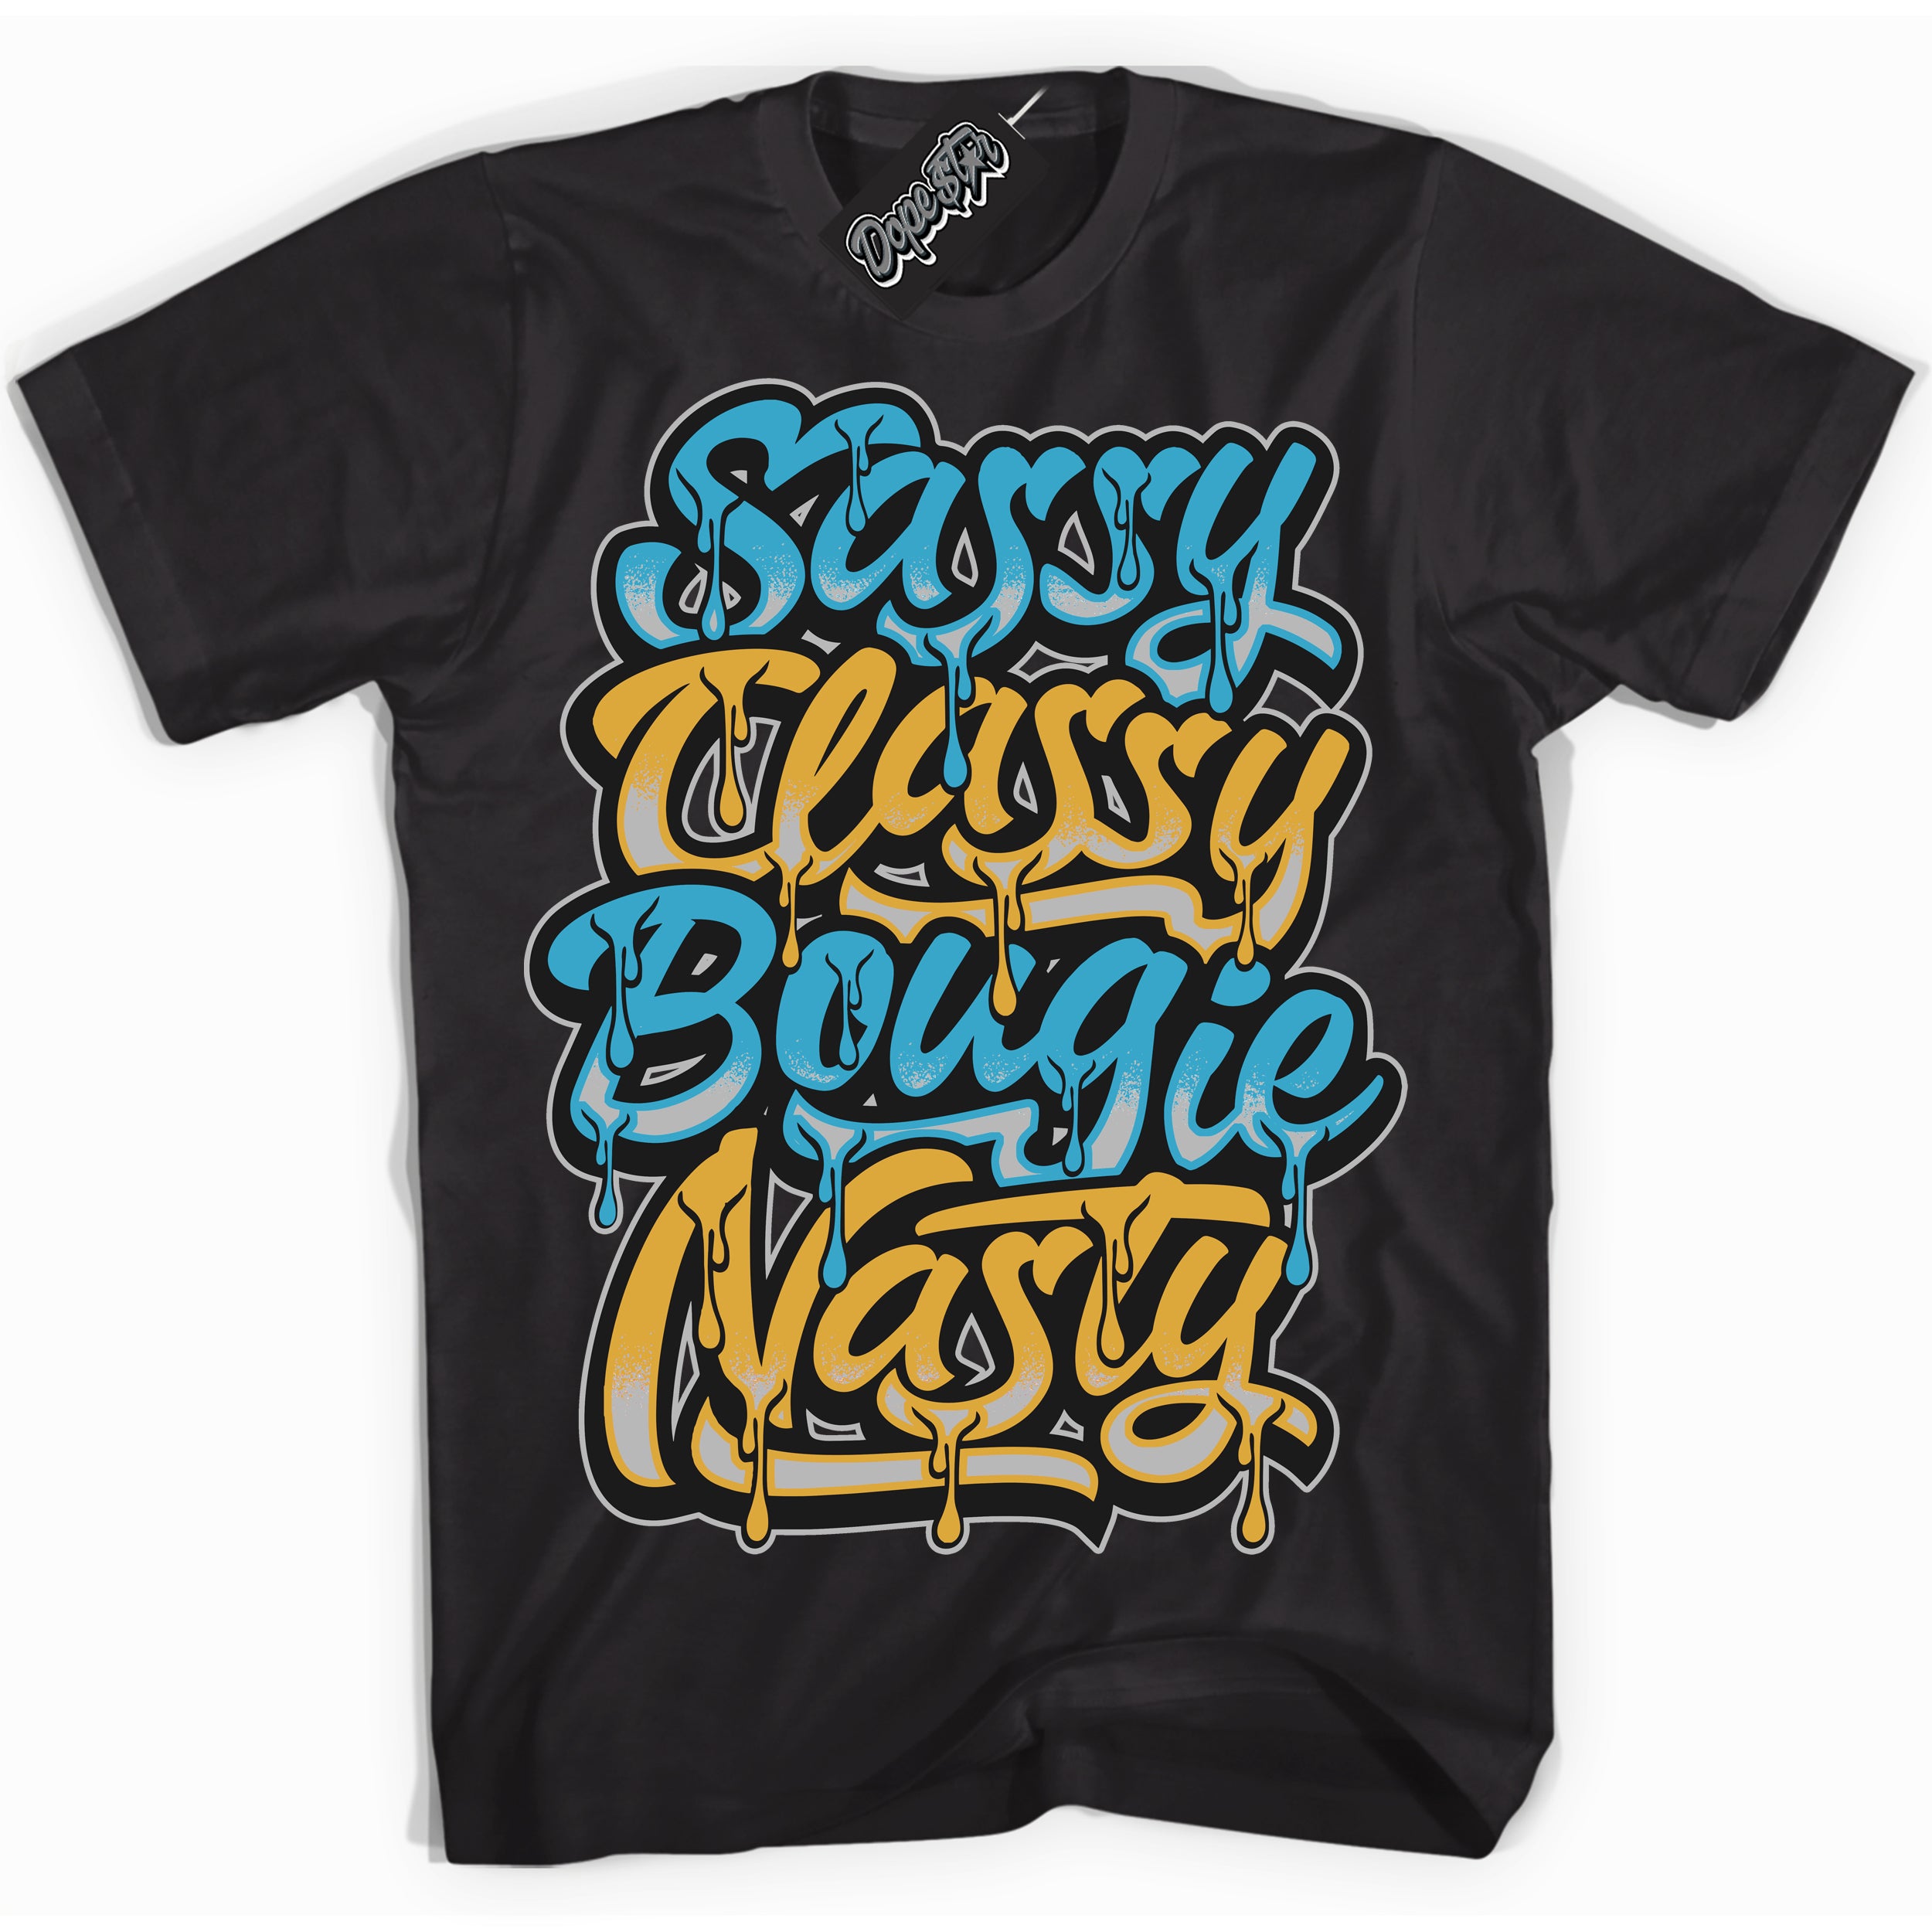 Cool Black Shirt with “ Sassy Classy” design that perfectly matches Aqua 5s Sneakers.